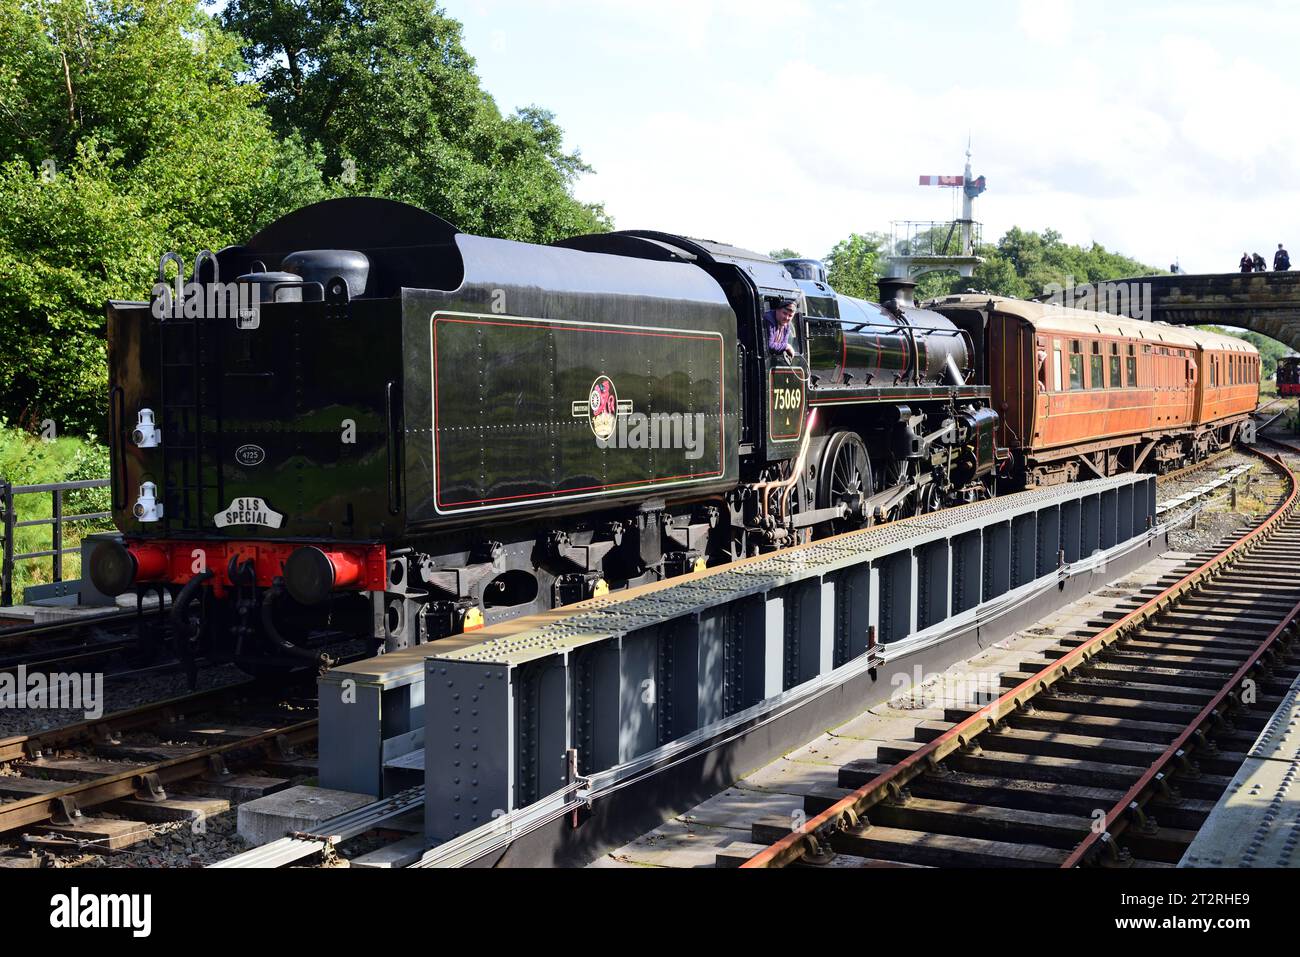 Running tender first, BR Standard Class 4 No 75069 arrives at Goathland on the North Yorkshire Moors Railway during its 50th anniversary gala. Stock Photo